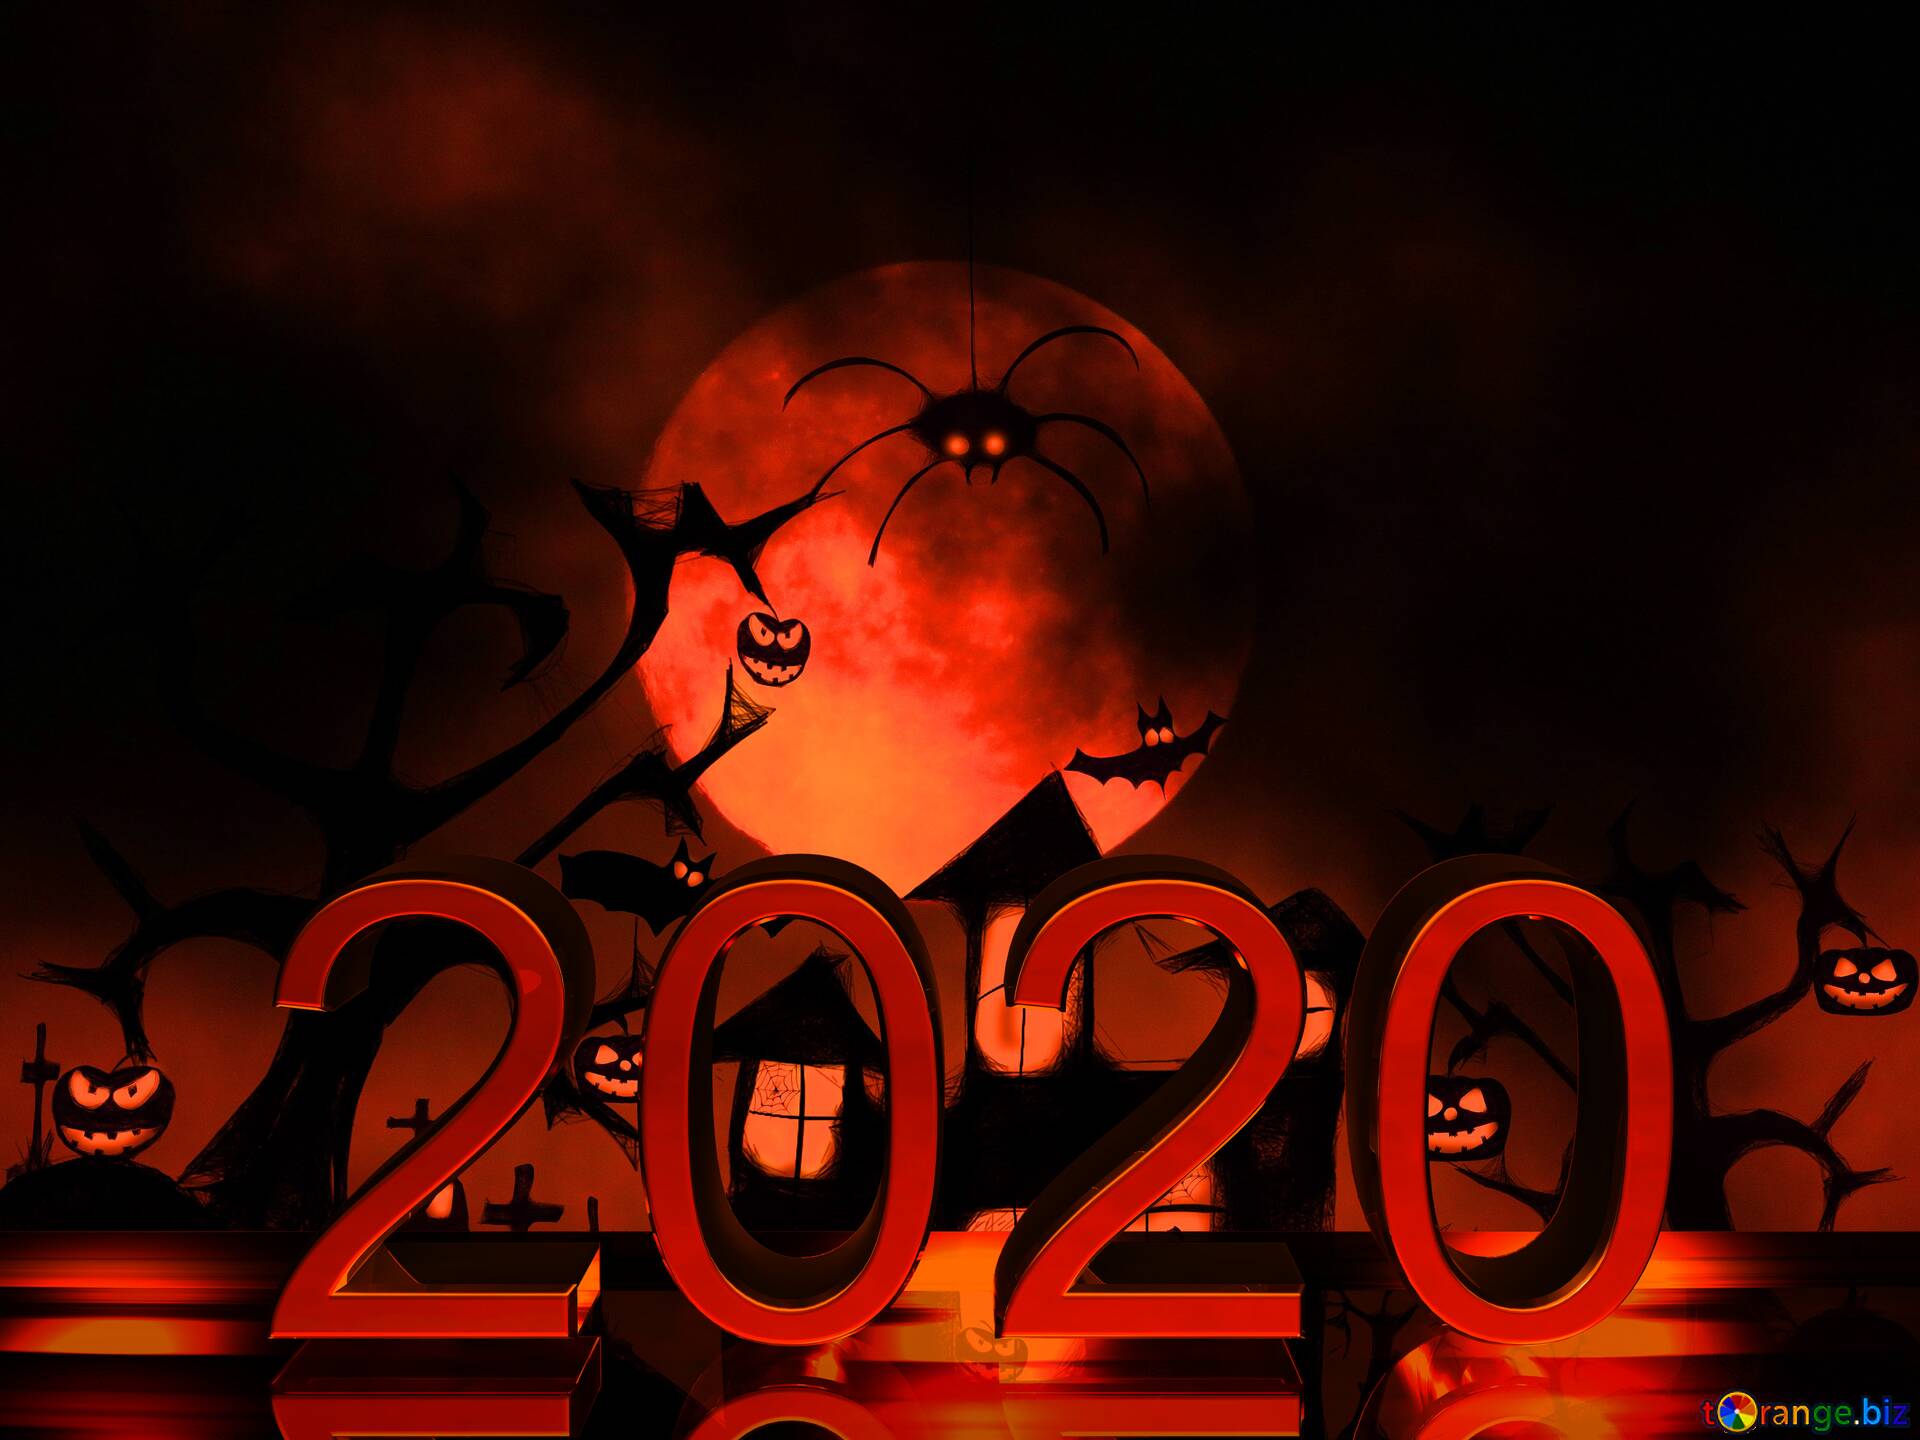 Download Free Picture Halloween 2020 Red Metal Digits On CC BY License Free Image Stock TOrange.biz Fx №213450